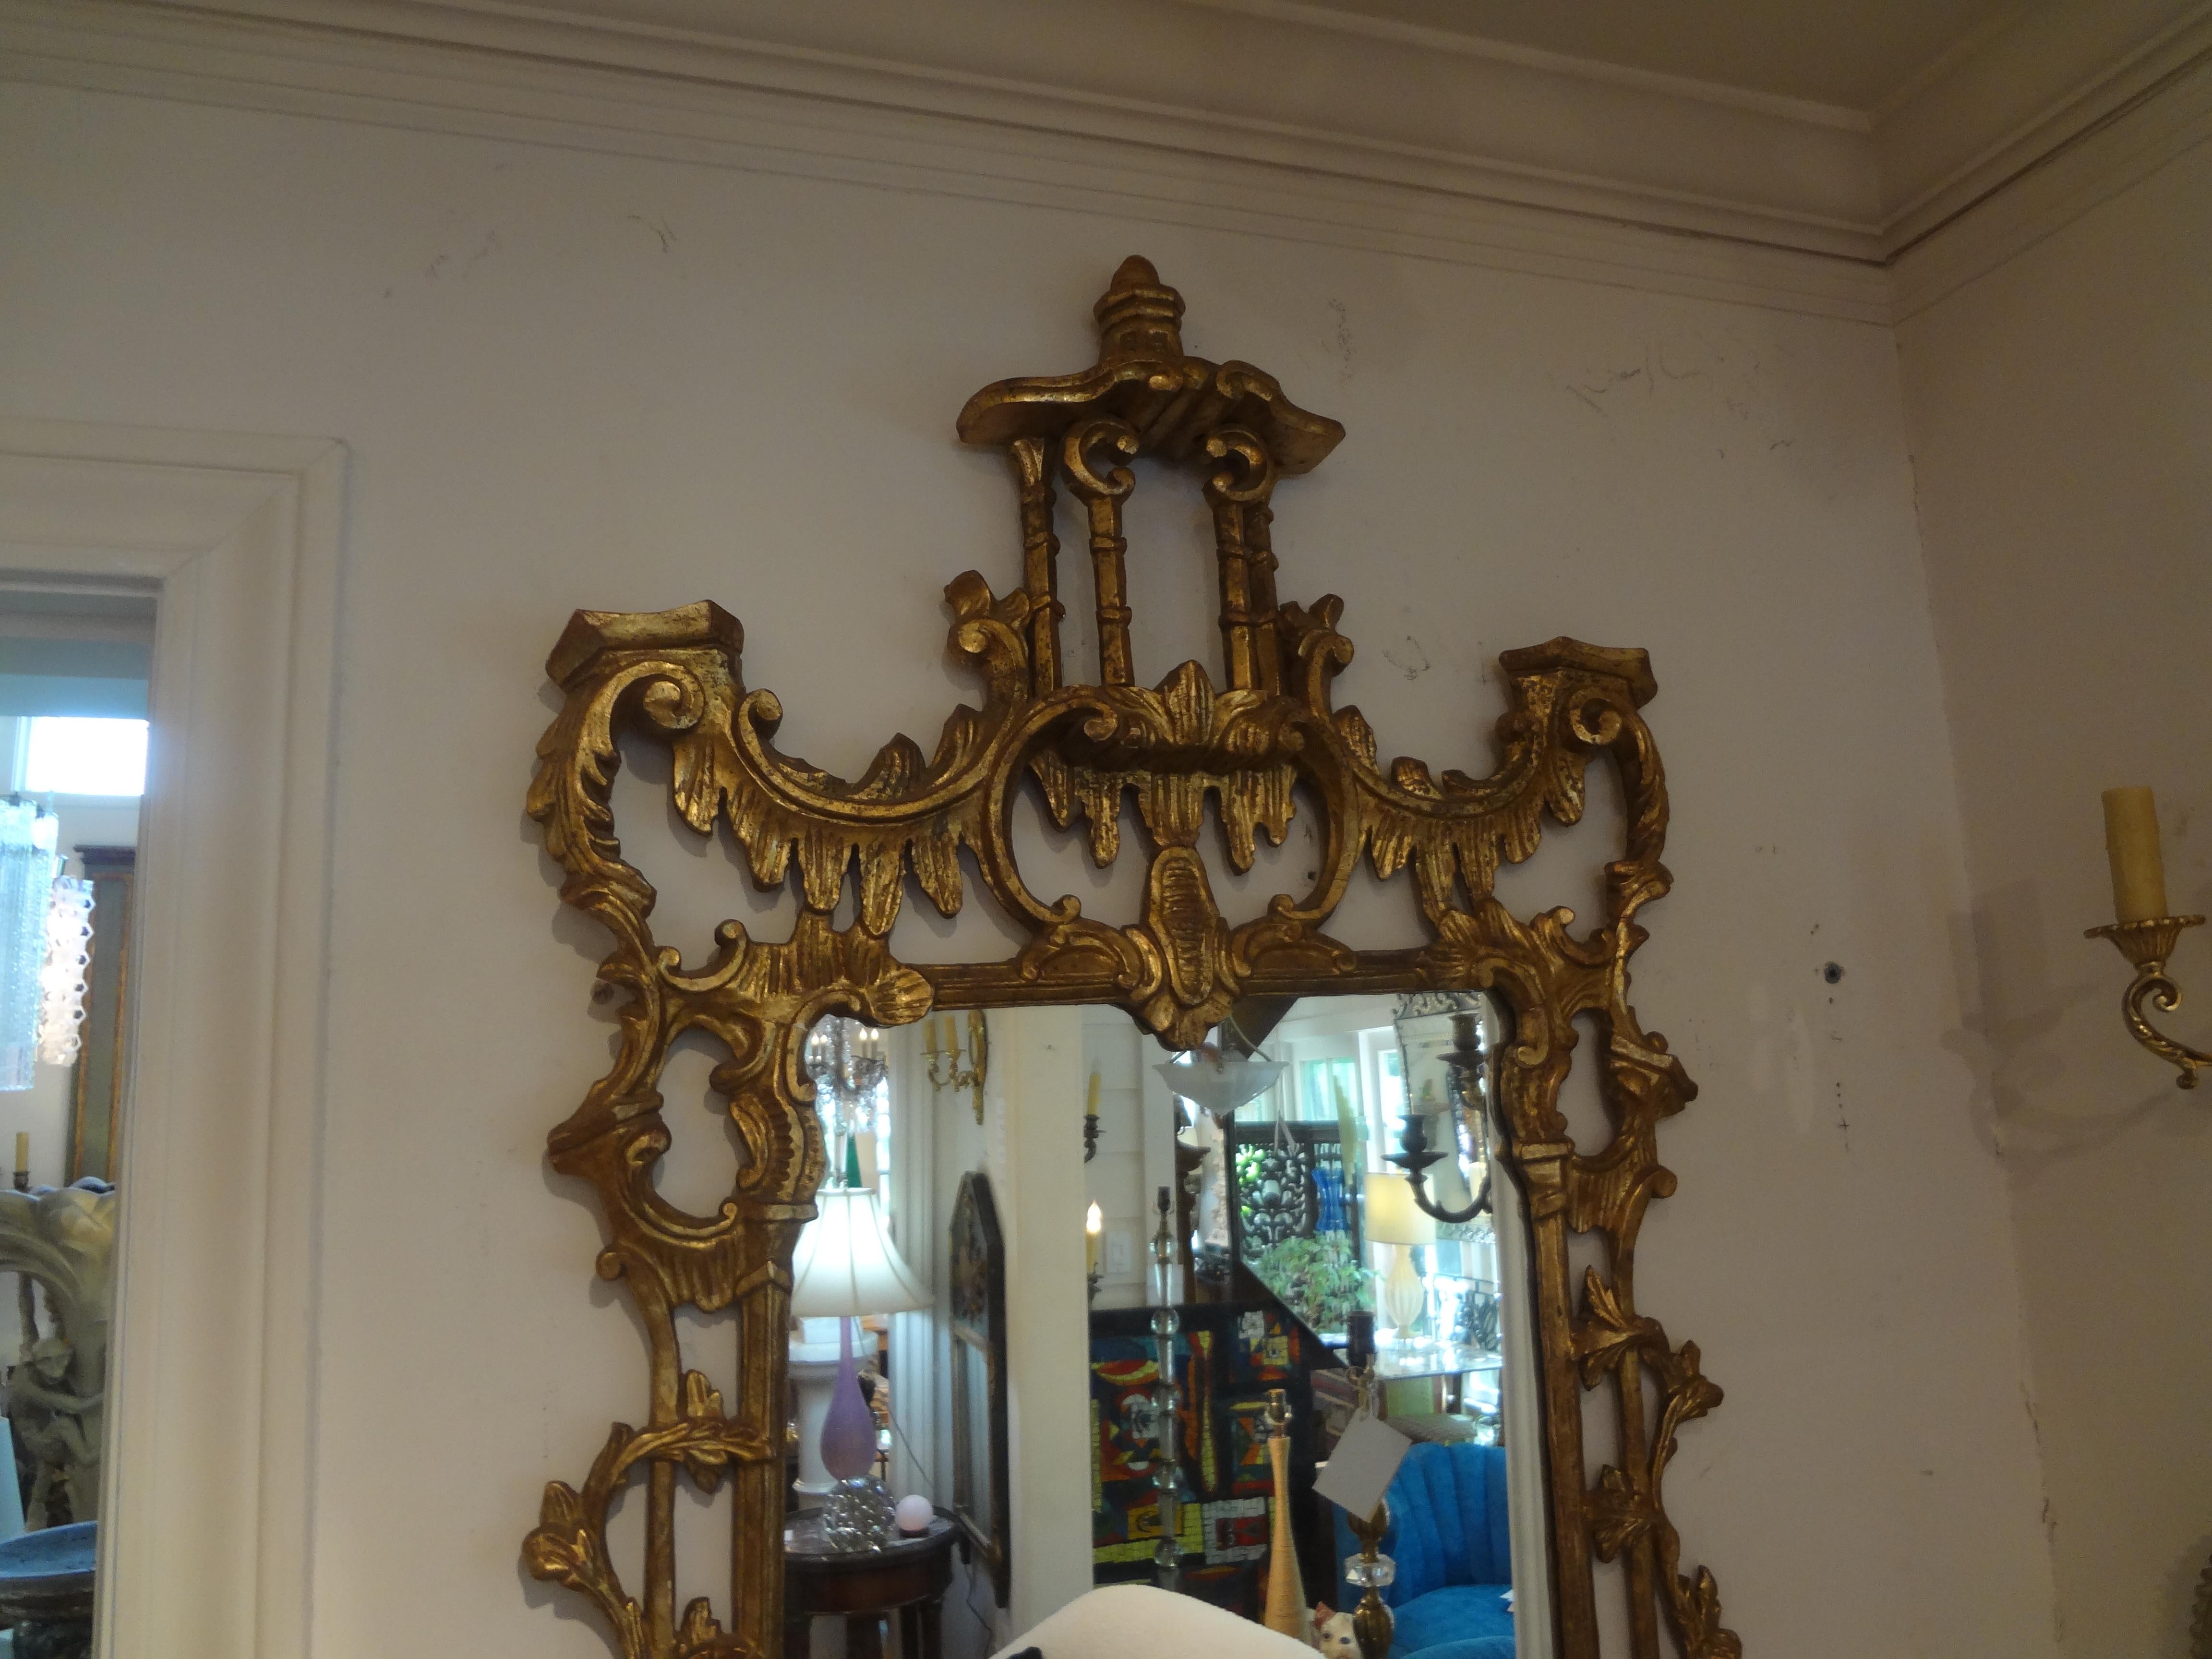 Vintage Italian Chinese Chippendale Style carved giltwood pagoda mirror.
Vintage Chinese Chippendale style carved gilt wood pagoda mirror. This large Chinese Chippendale mirror is the perfect accent for an entrance hall above a console, commode or